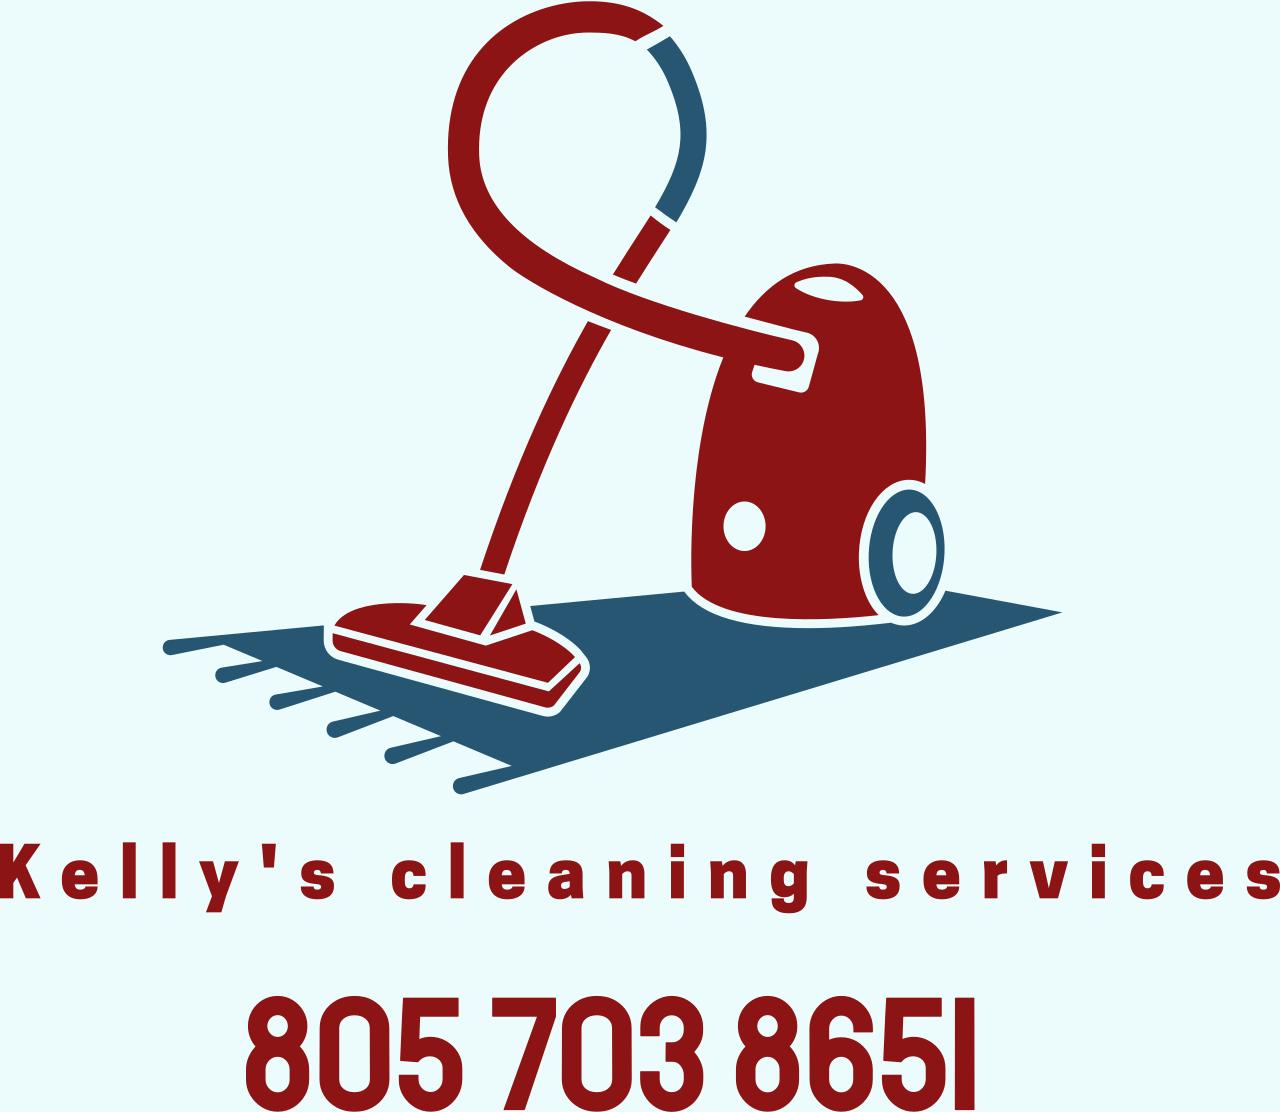 Kelly's cleaning services      

's web page